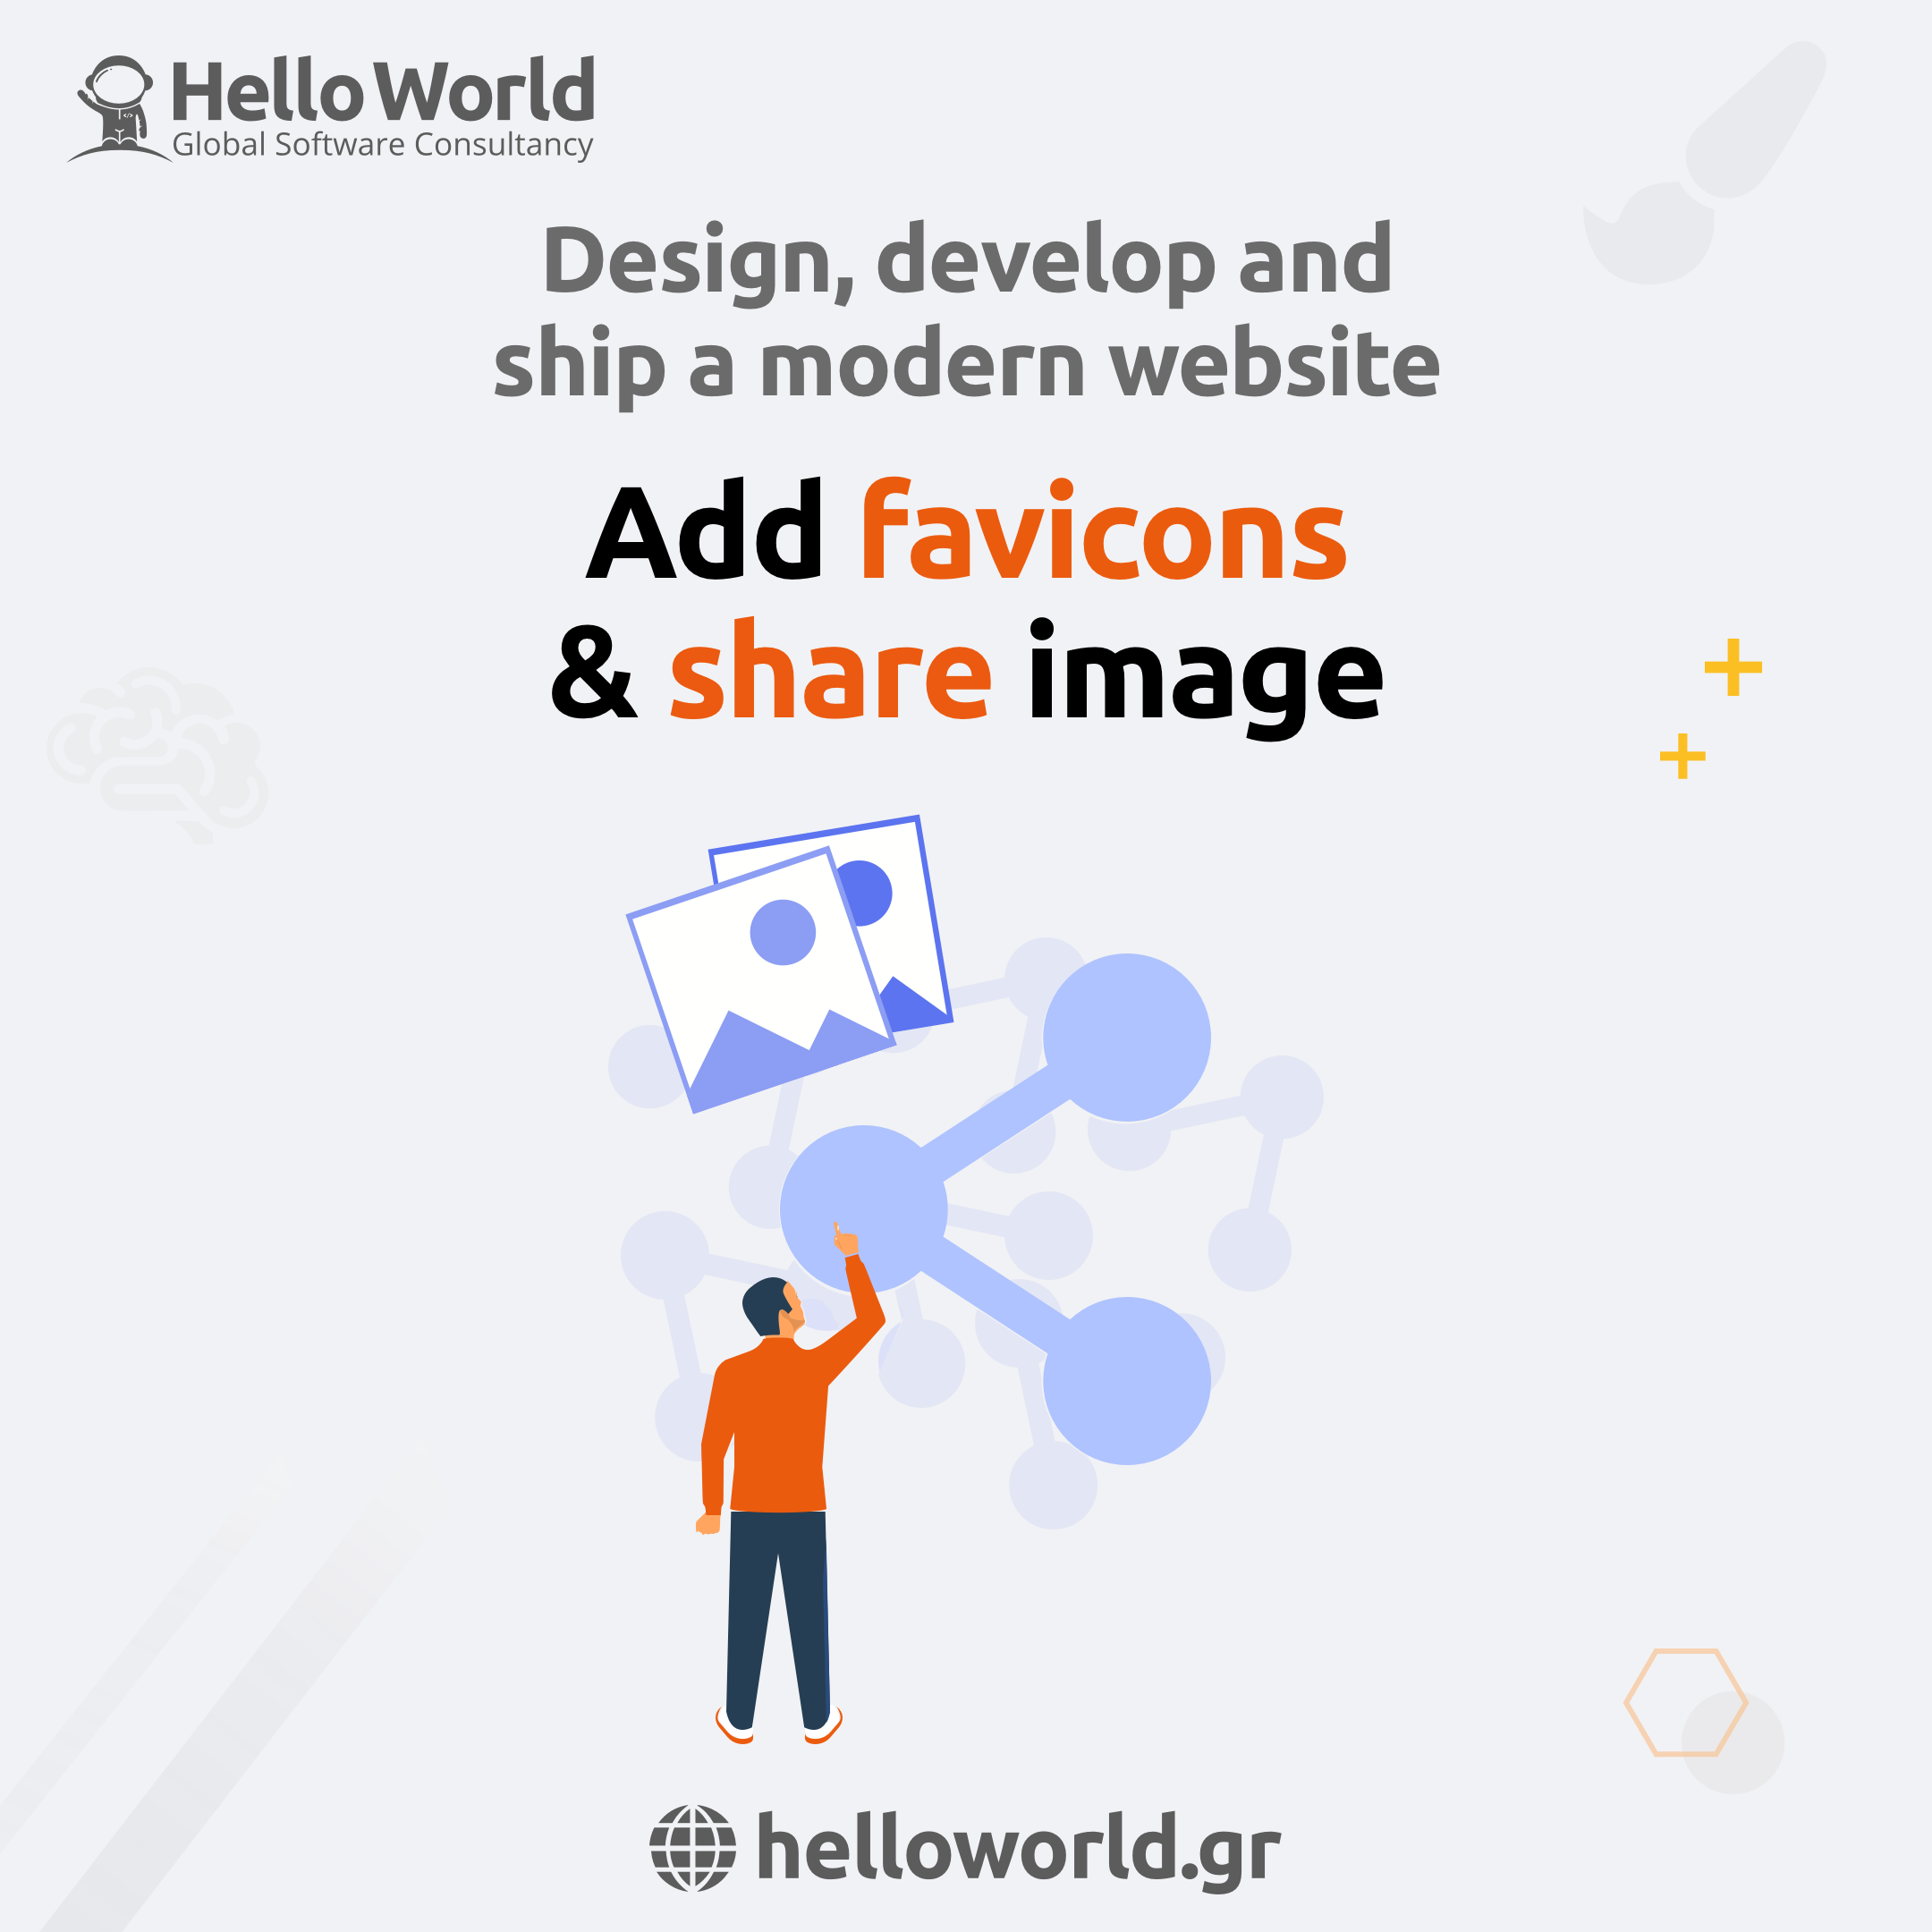 Create a Modern Website: Add favicons and share image